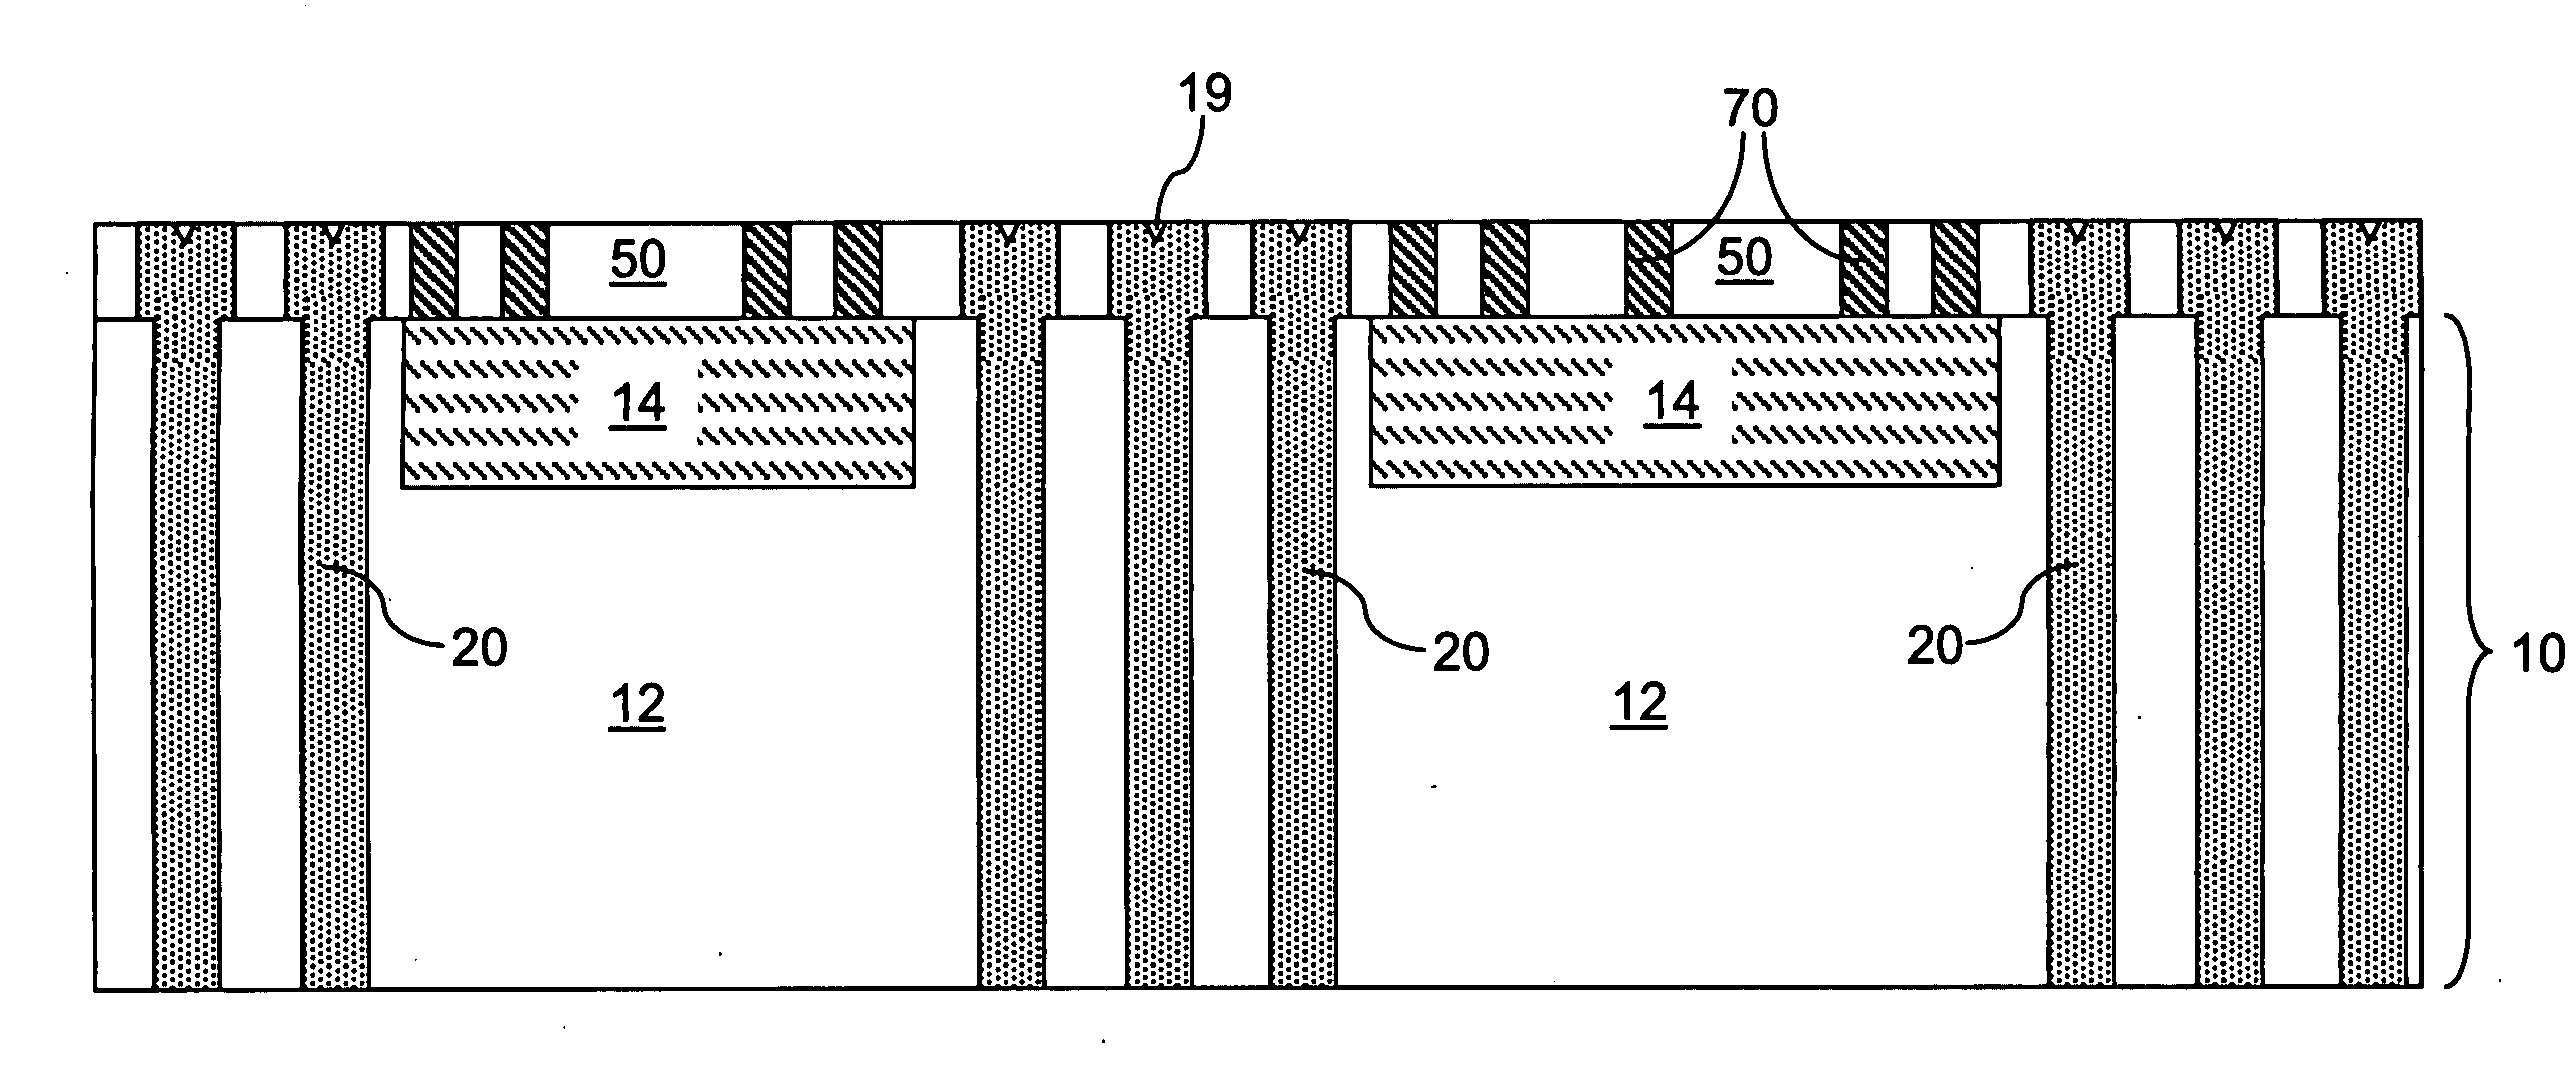 Metal wiring structure for integration with through substrate vias